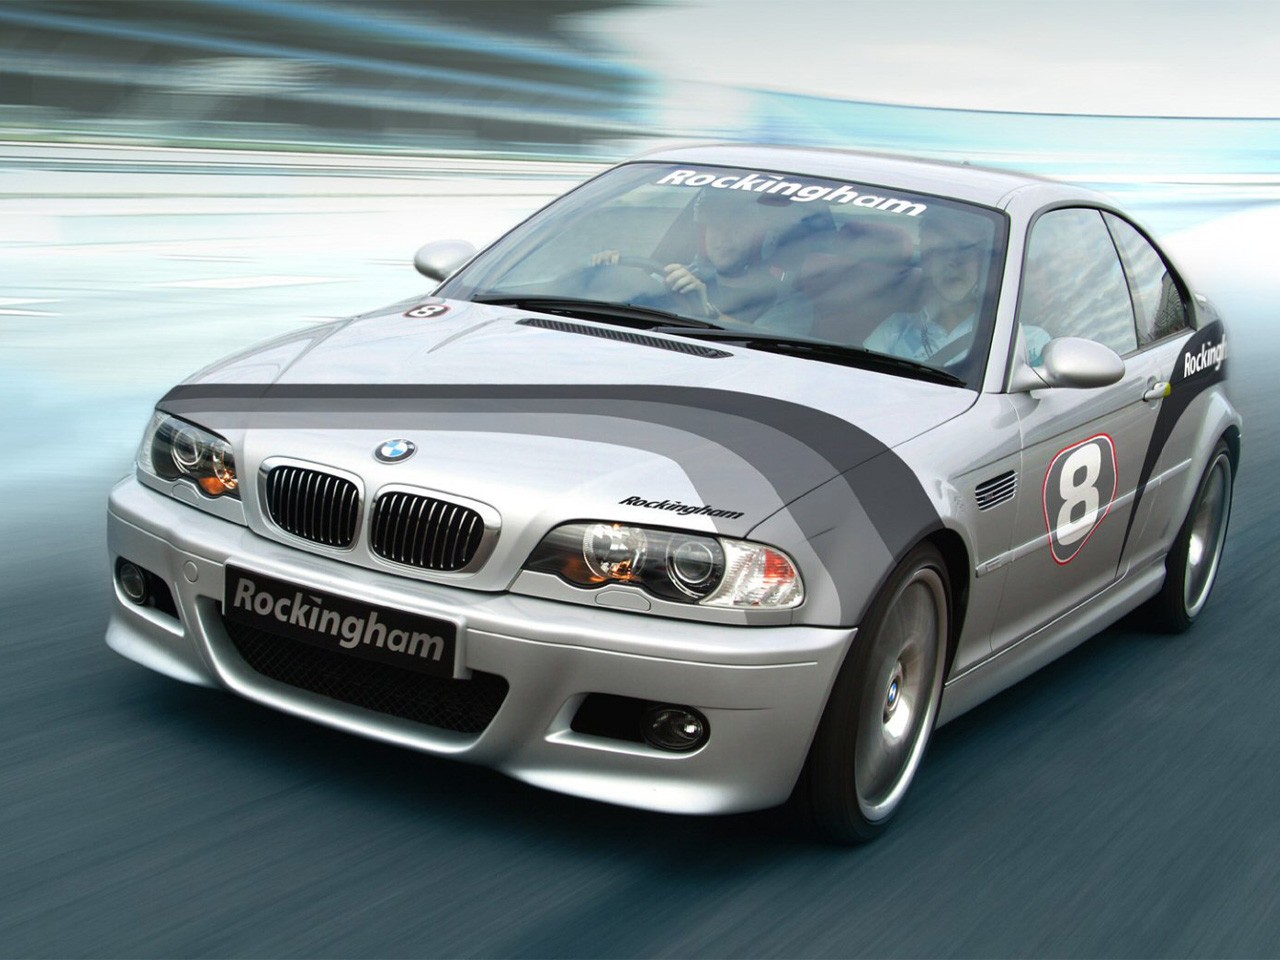 BMW 3 Series E46 Wallpapers Car wallpapers HD